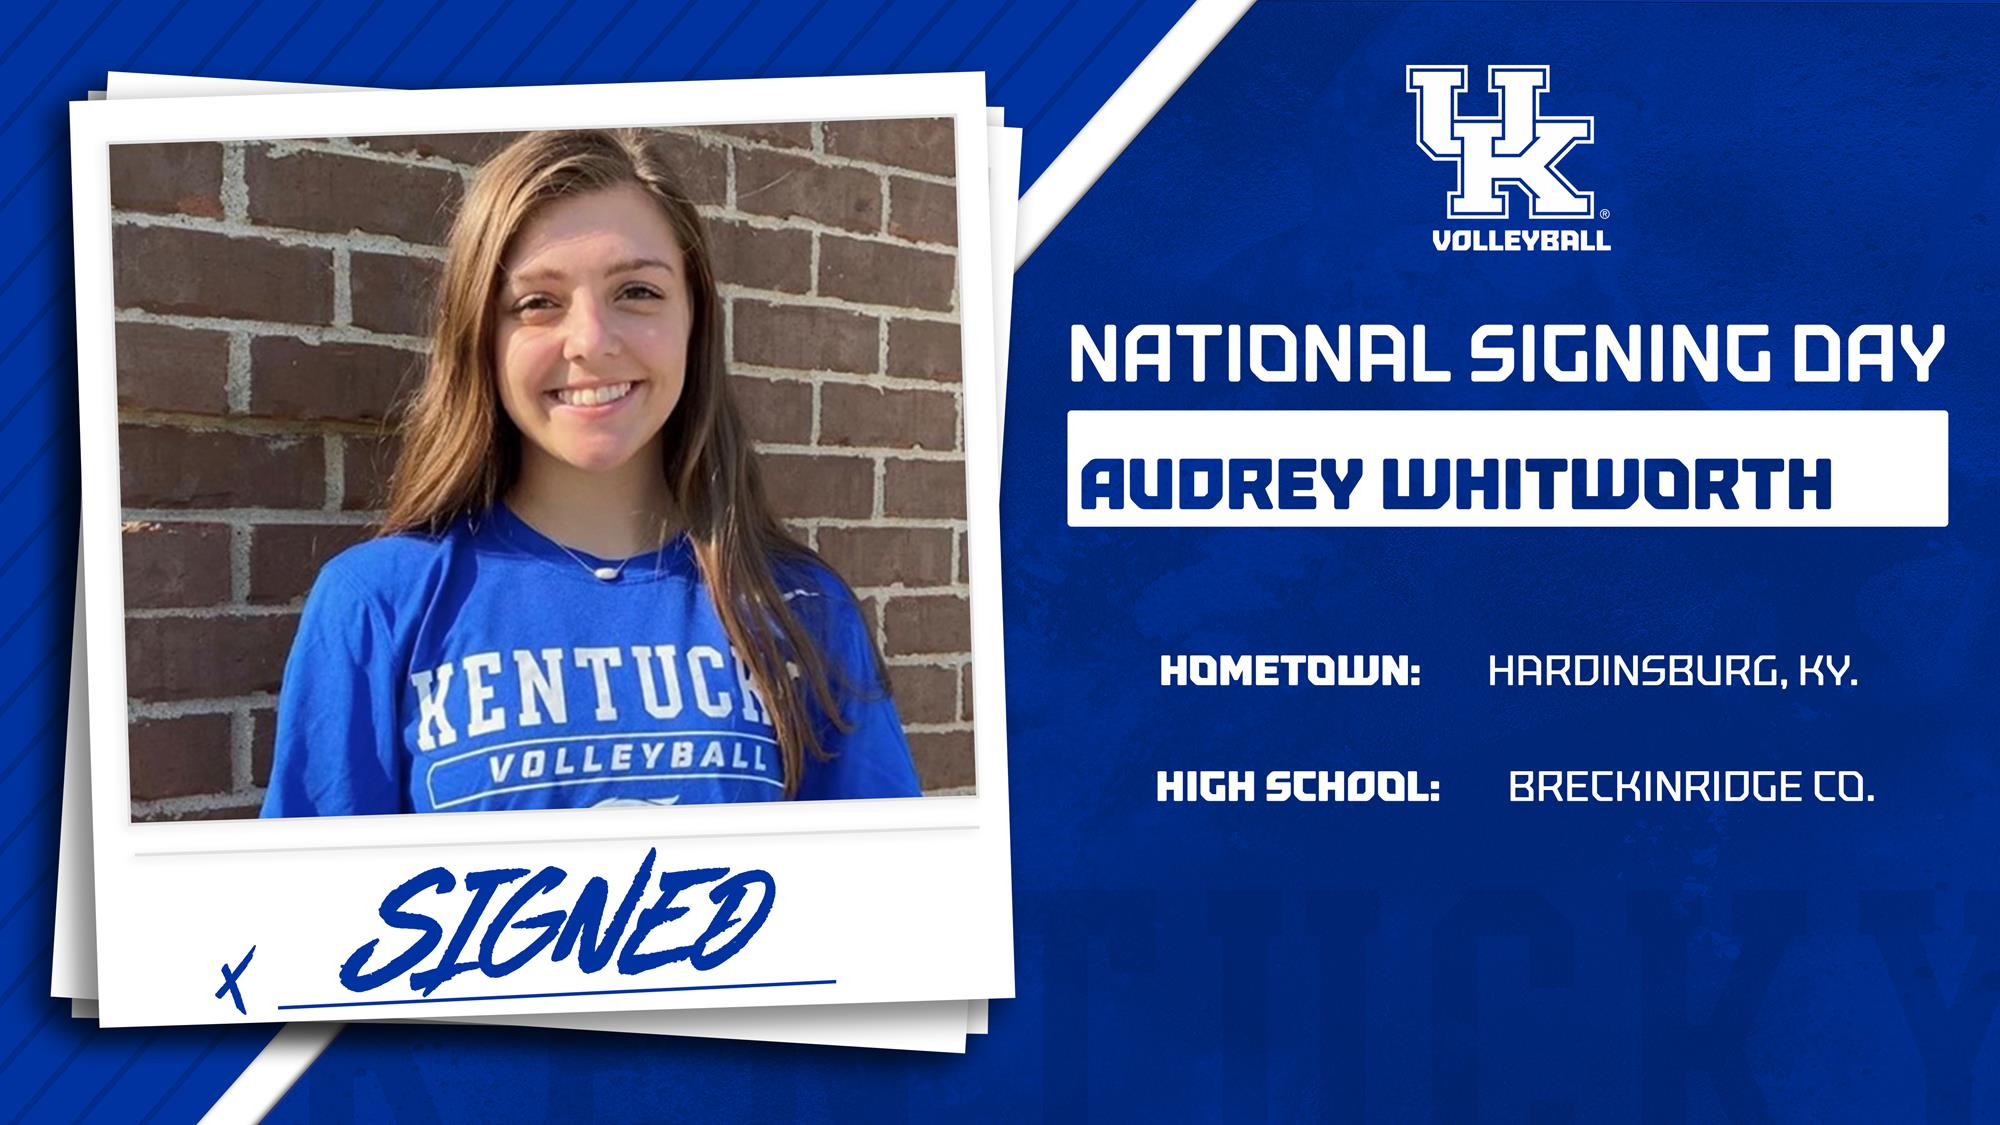 Kentucky Volleyball Announces Addition of Audrey Whitworth